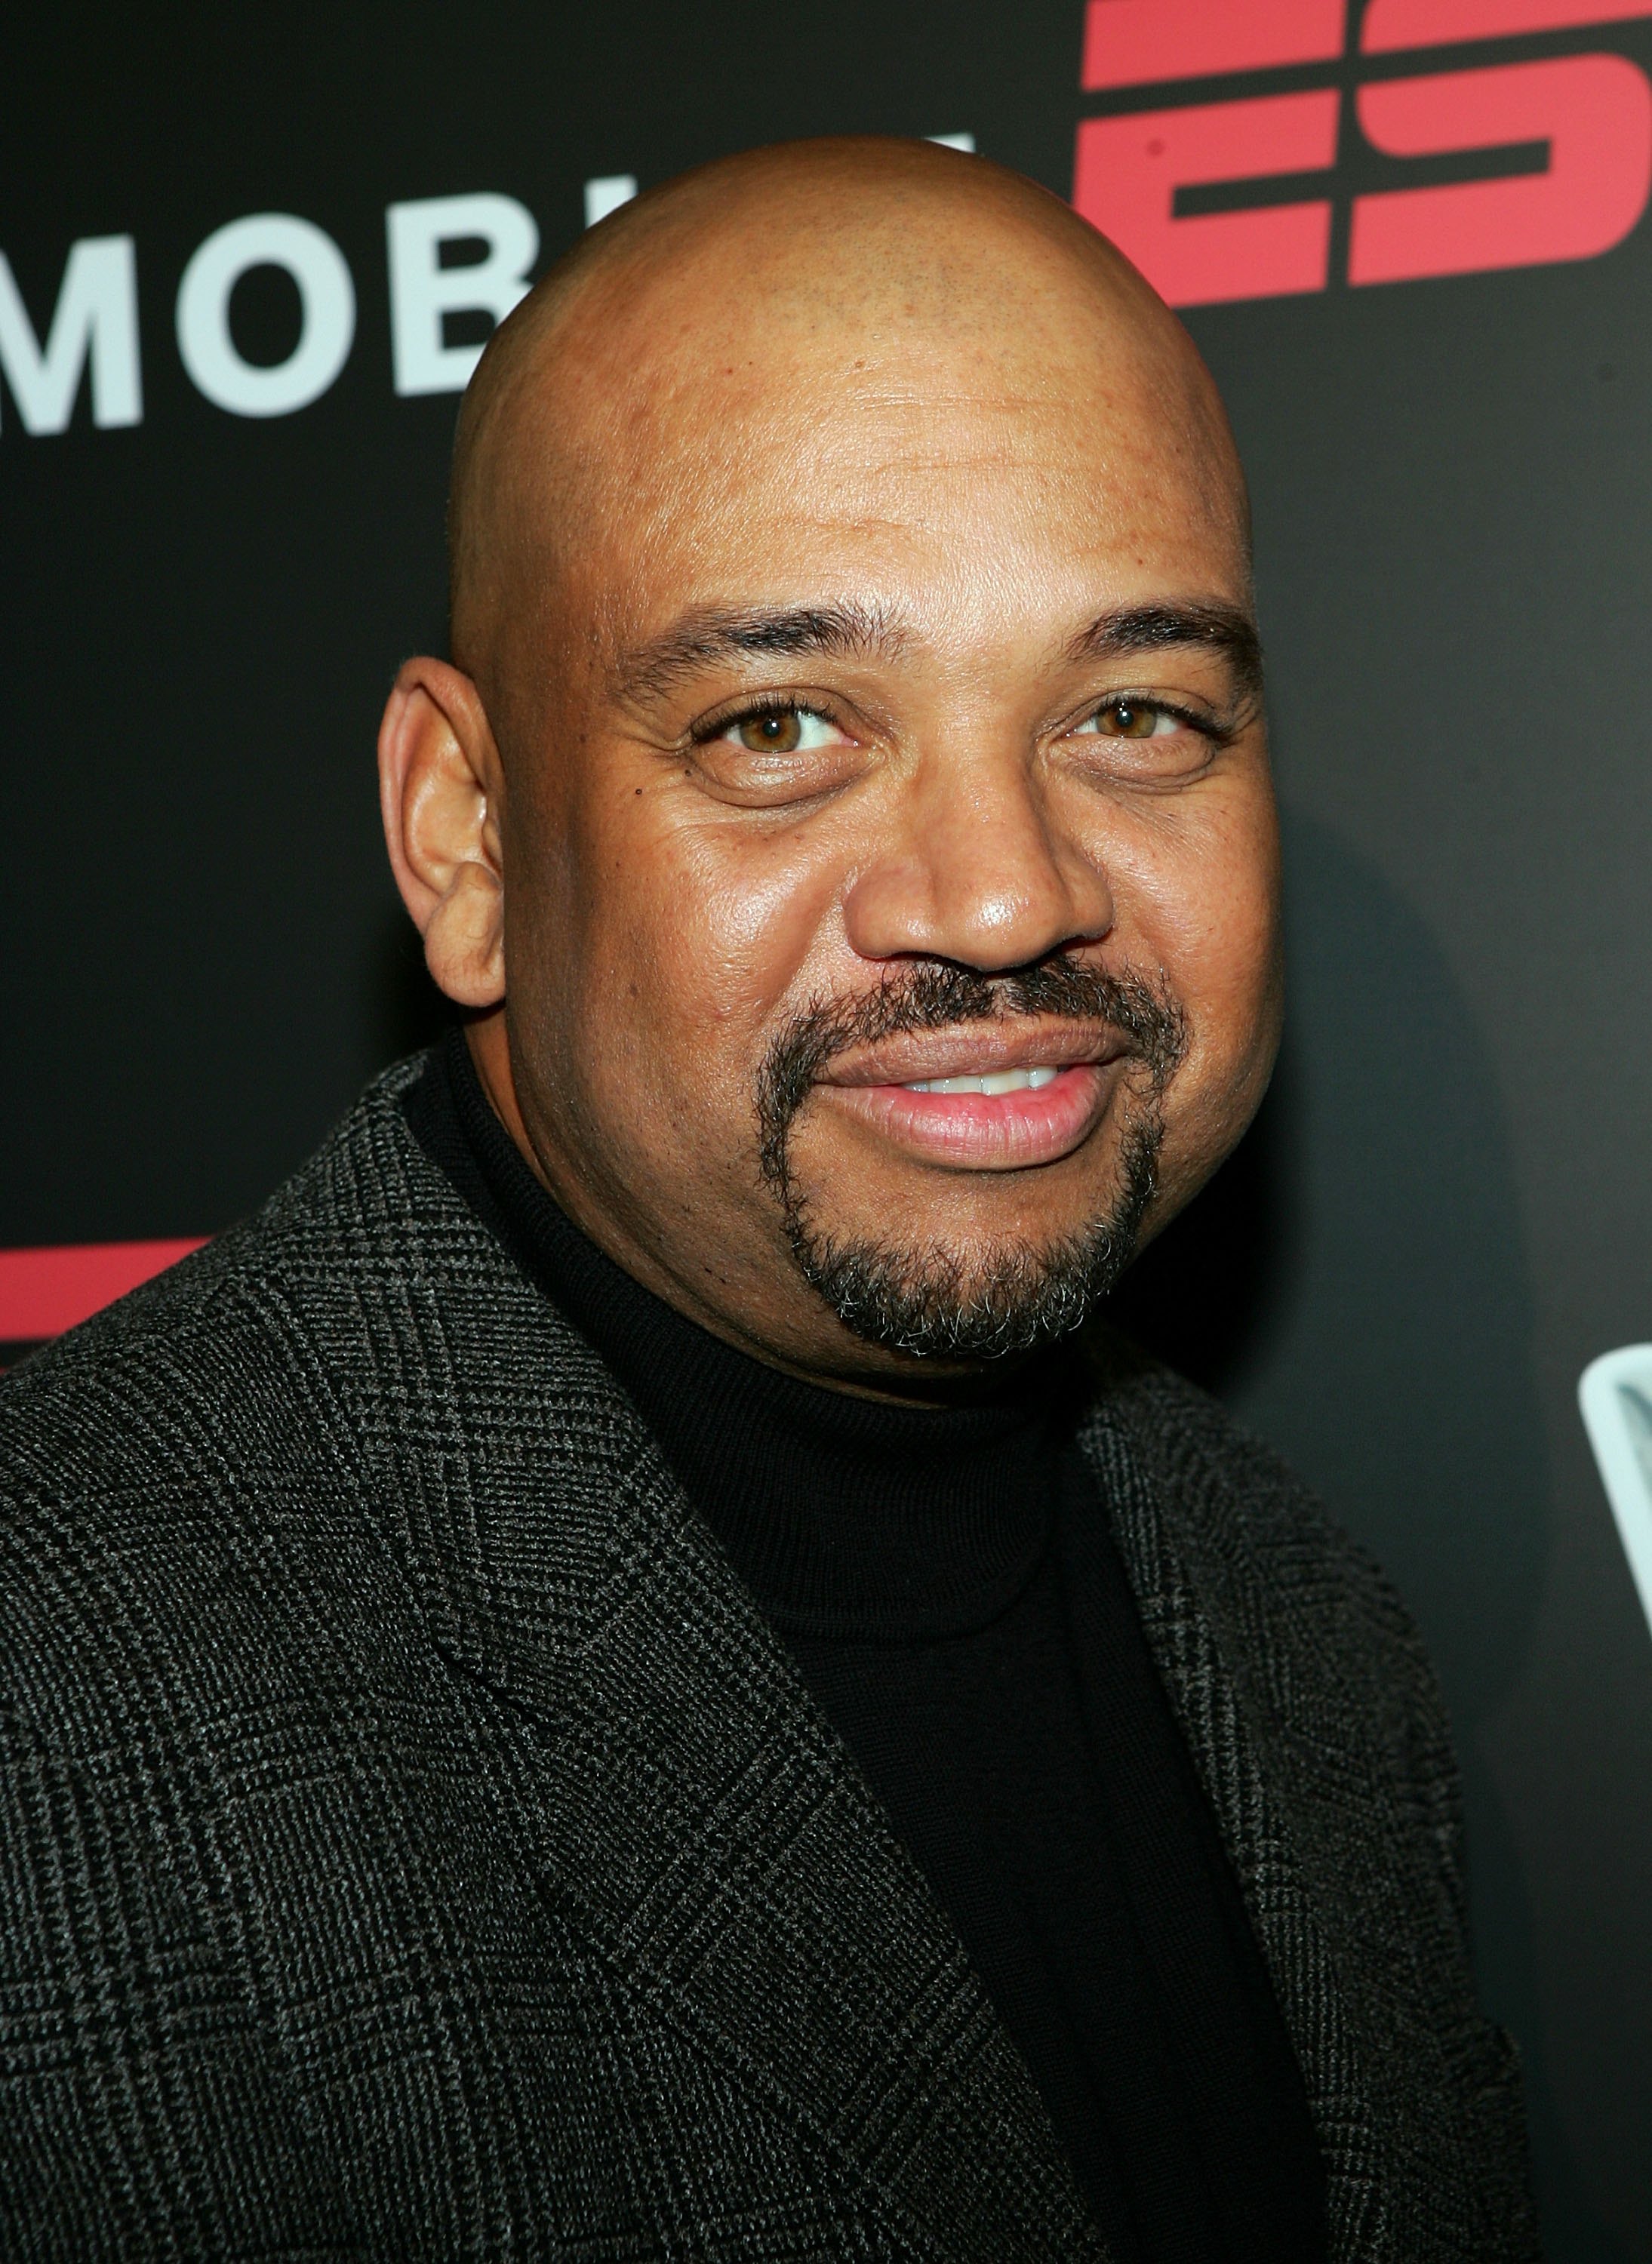 DETROIT - FEBRUARY 3:  Sports writer and co-host of ESPN's 'Pardon the Interruption' Michael Wilbon arrives for the ESPN The Magazine Next Party during Super Bowl XL weekend February 3, 2006 at the Colony Club in Detroit, Michigan.  (Photo by Evan Agostin